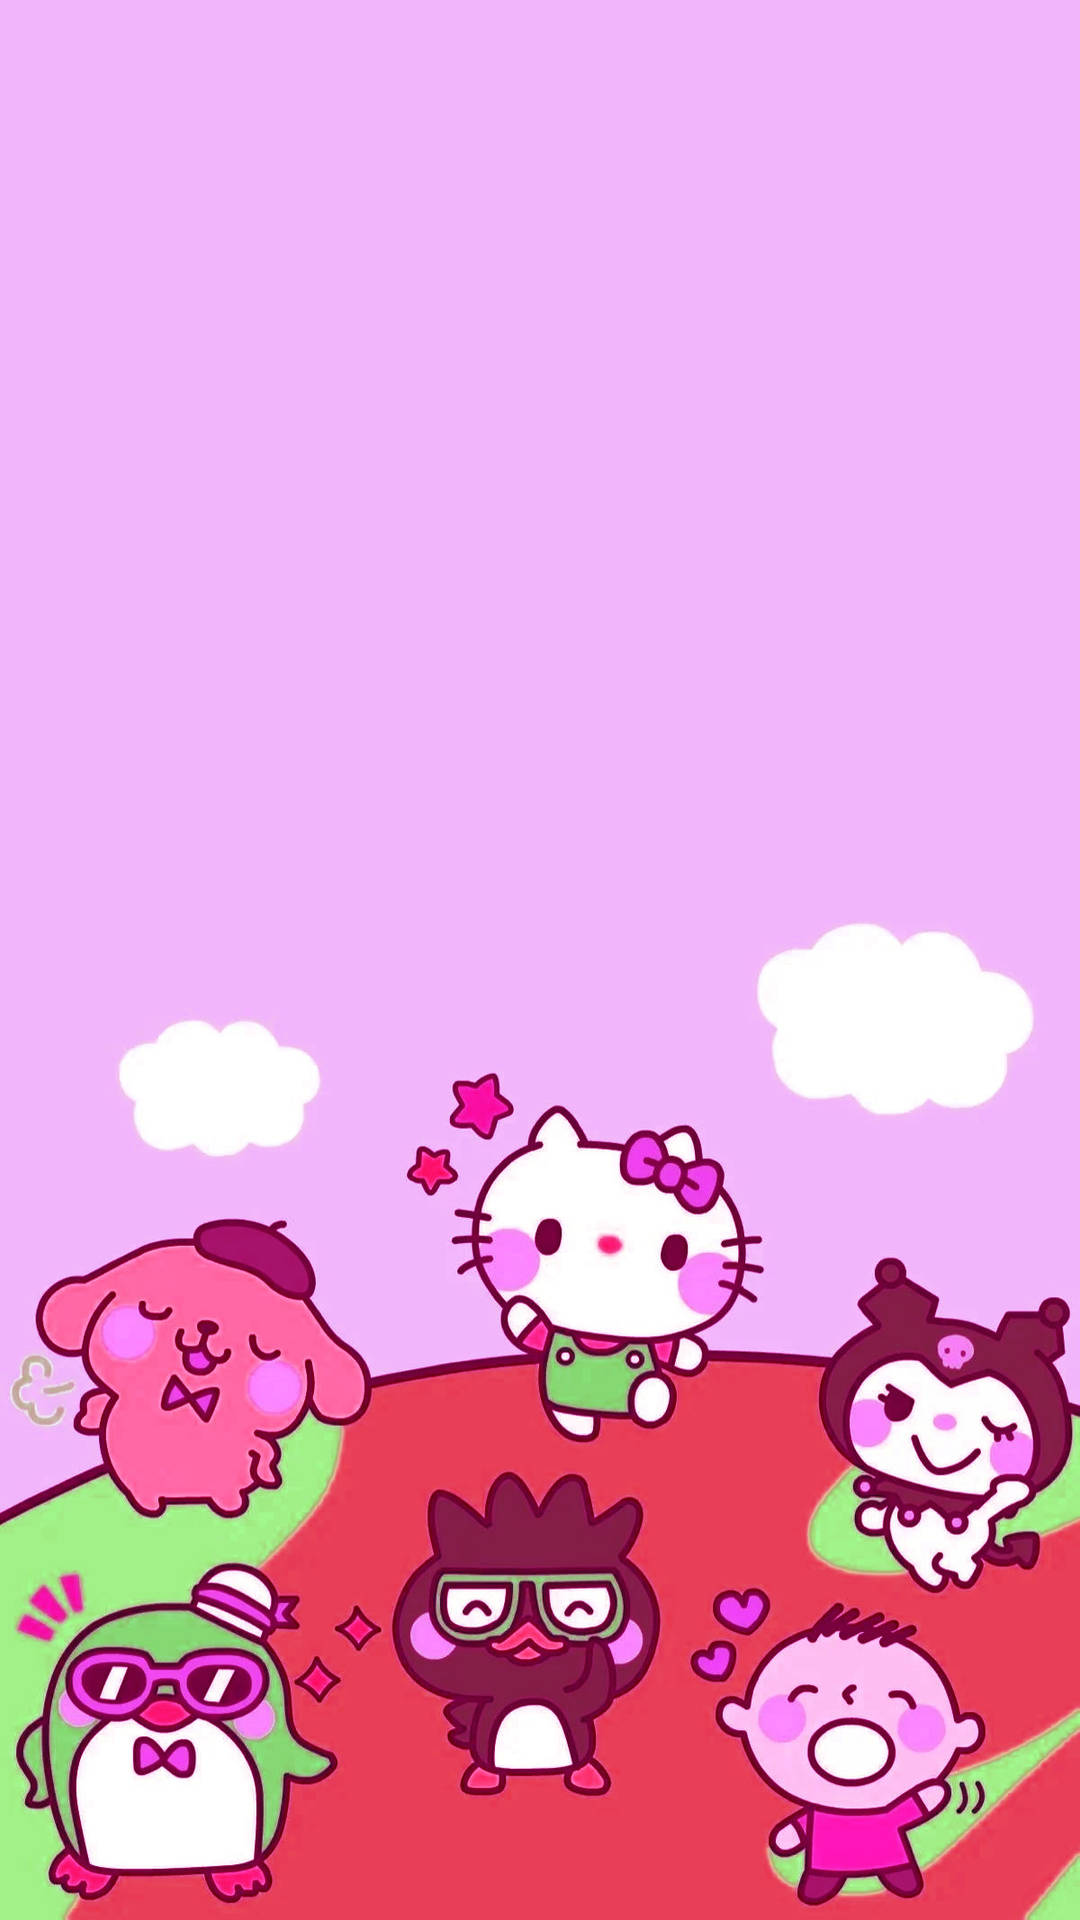 Get your daily energy boost with an adorable Sanrio-themed desktop! Wallpaper